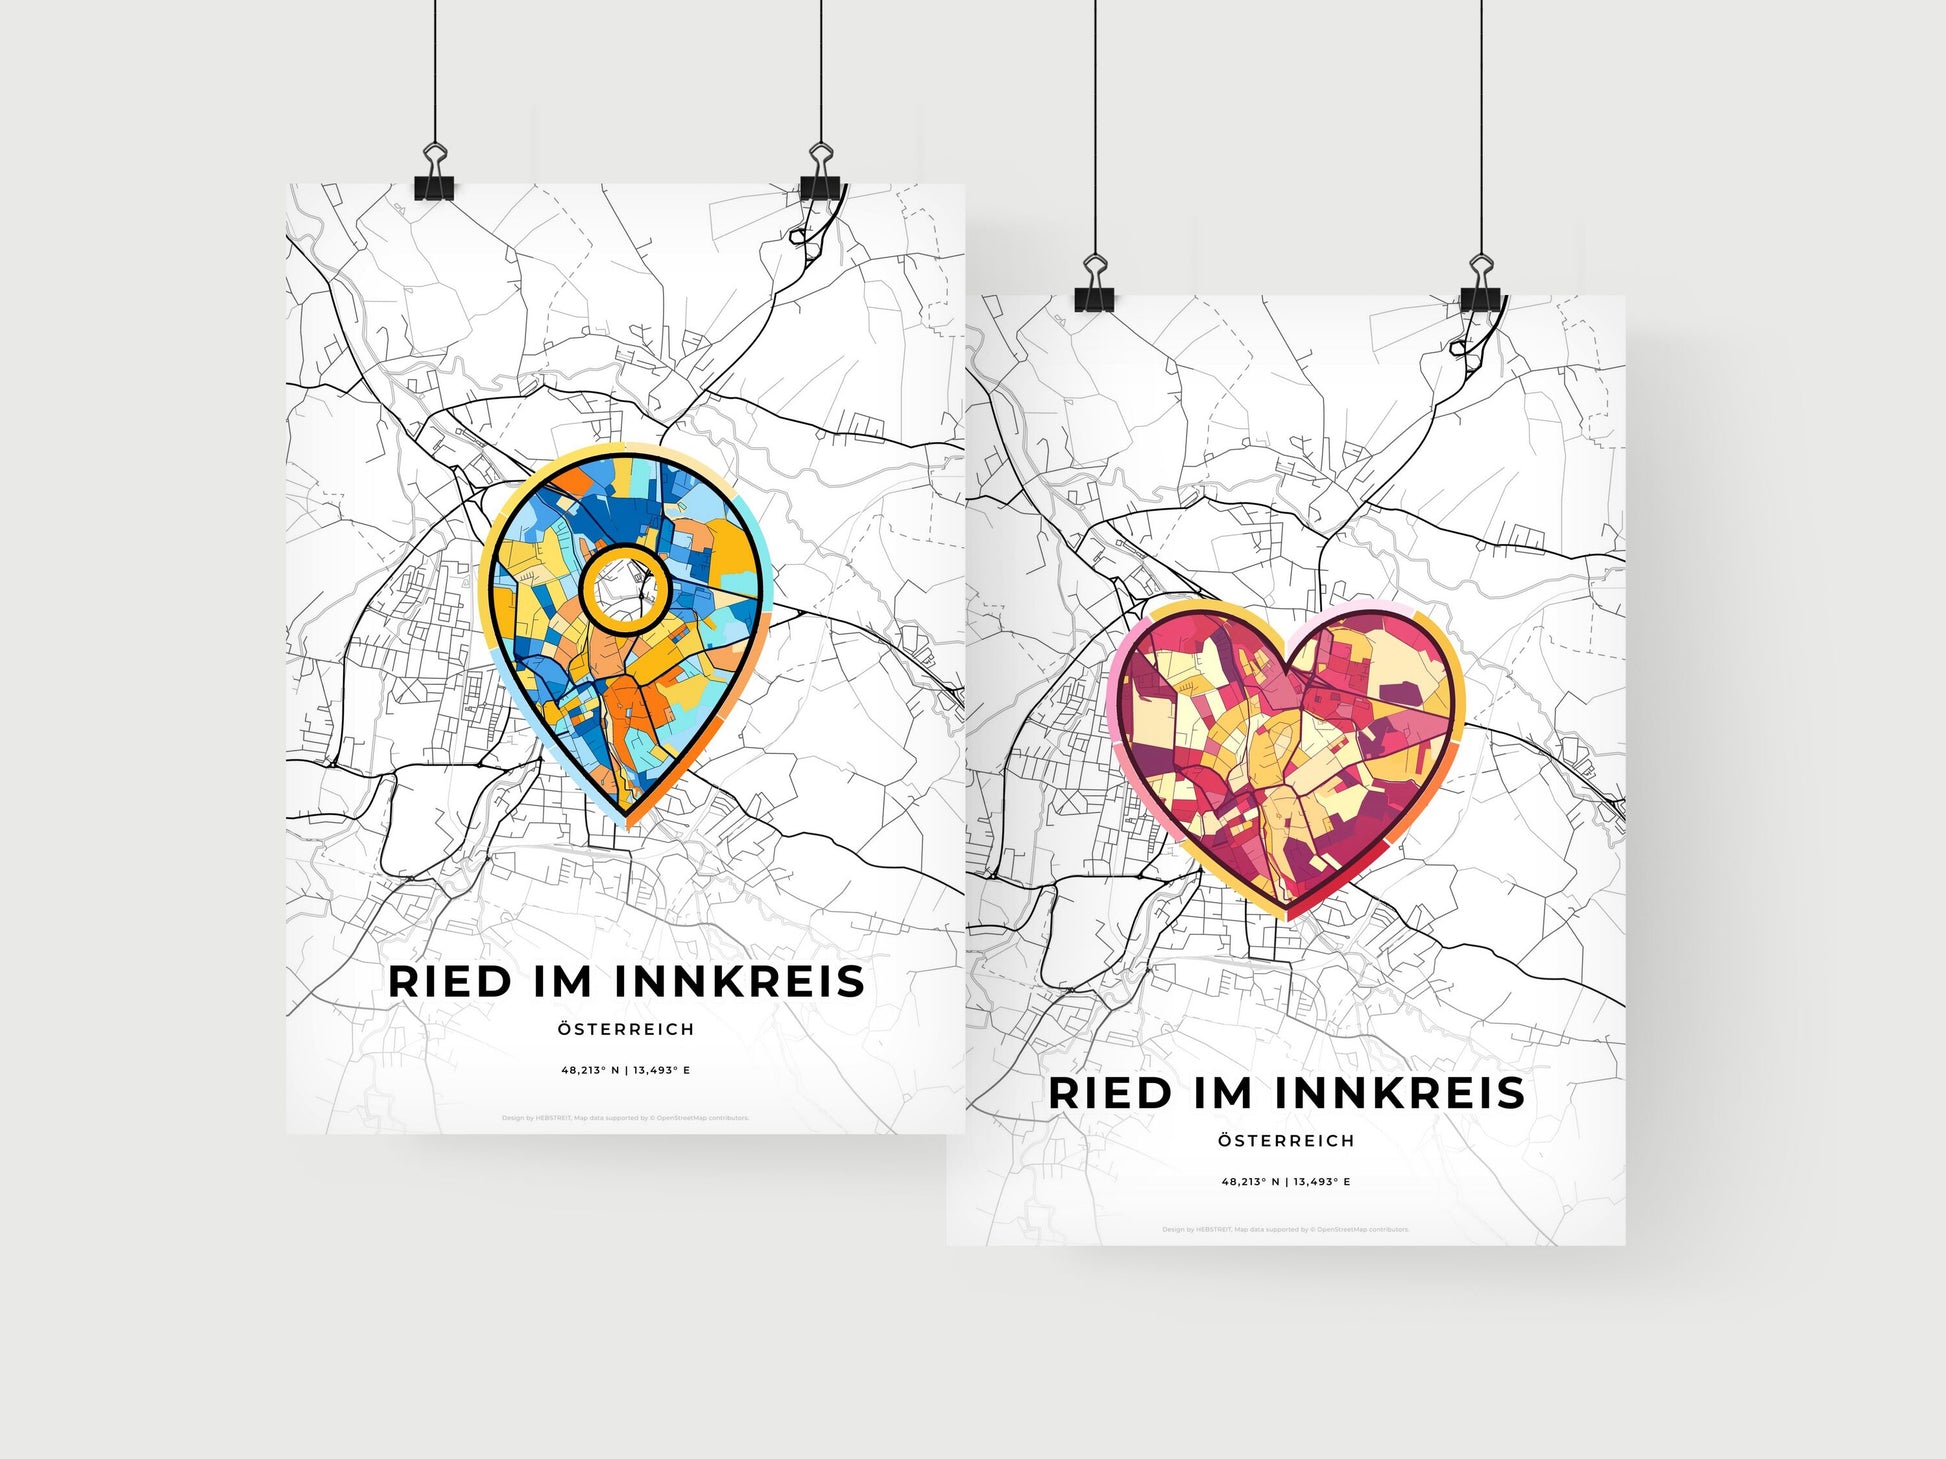 RIED IM INNKREIS AUSTRIA minimal art map with a colorful icon. Where it all began, Couple map gift.